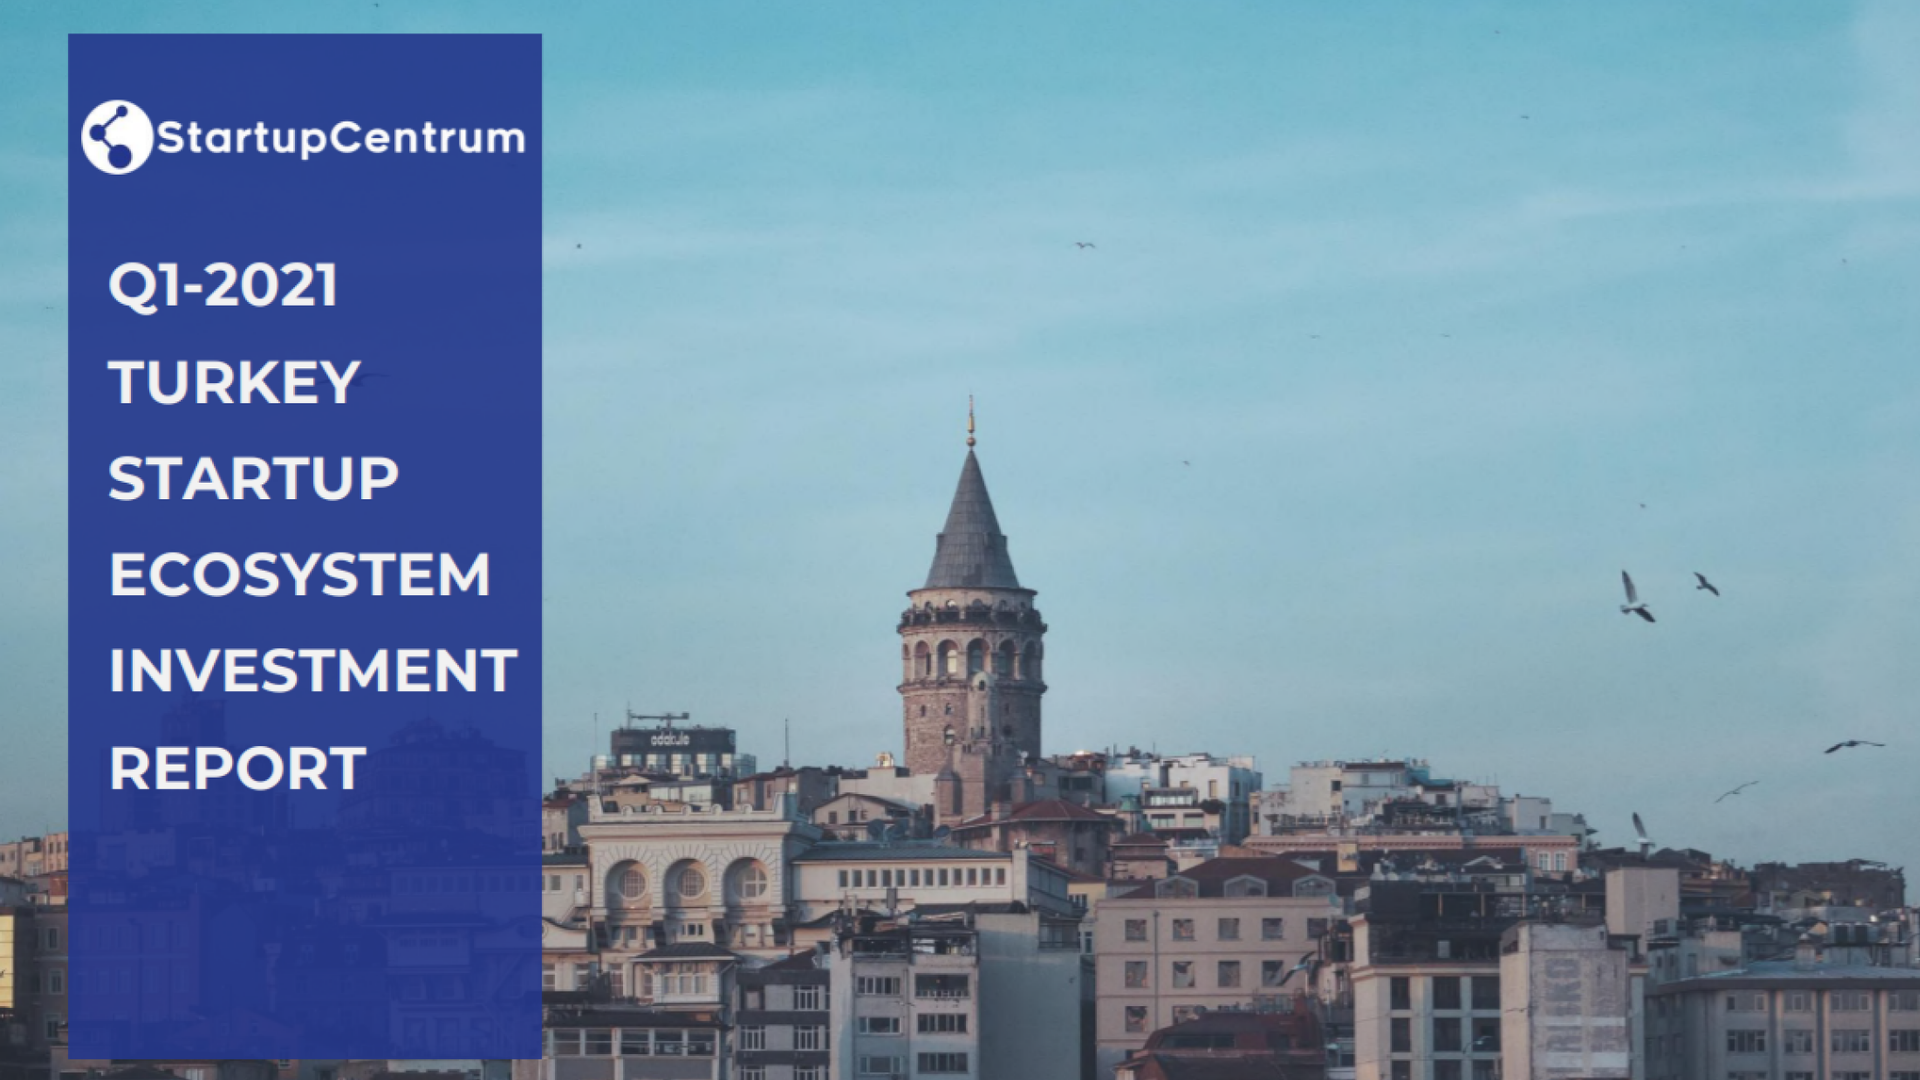 Q1-2021 Turkey Startup Ecosystem Investment Report.pdf Cover Image